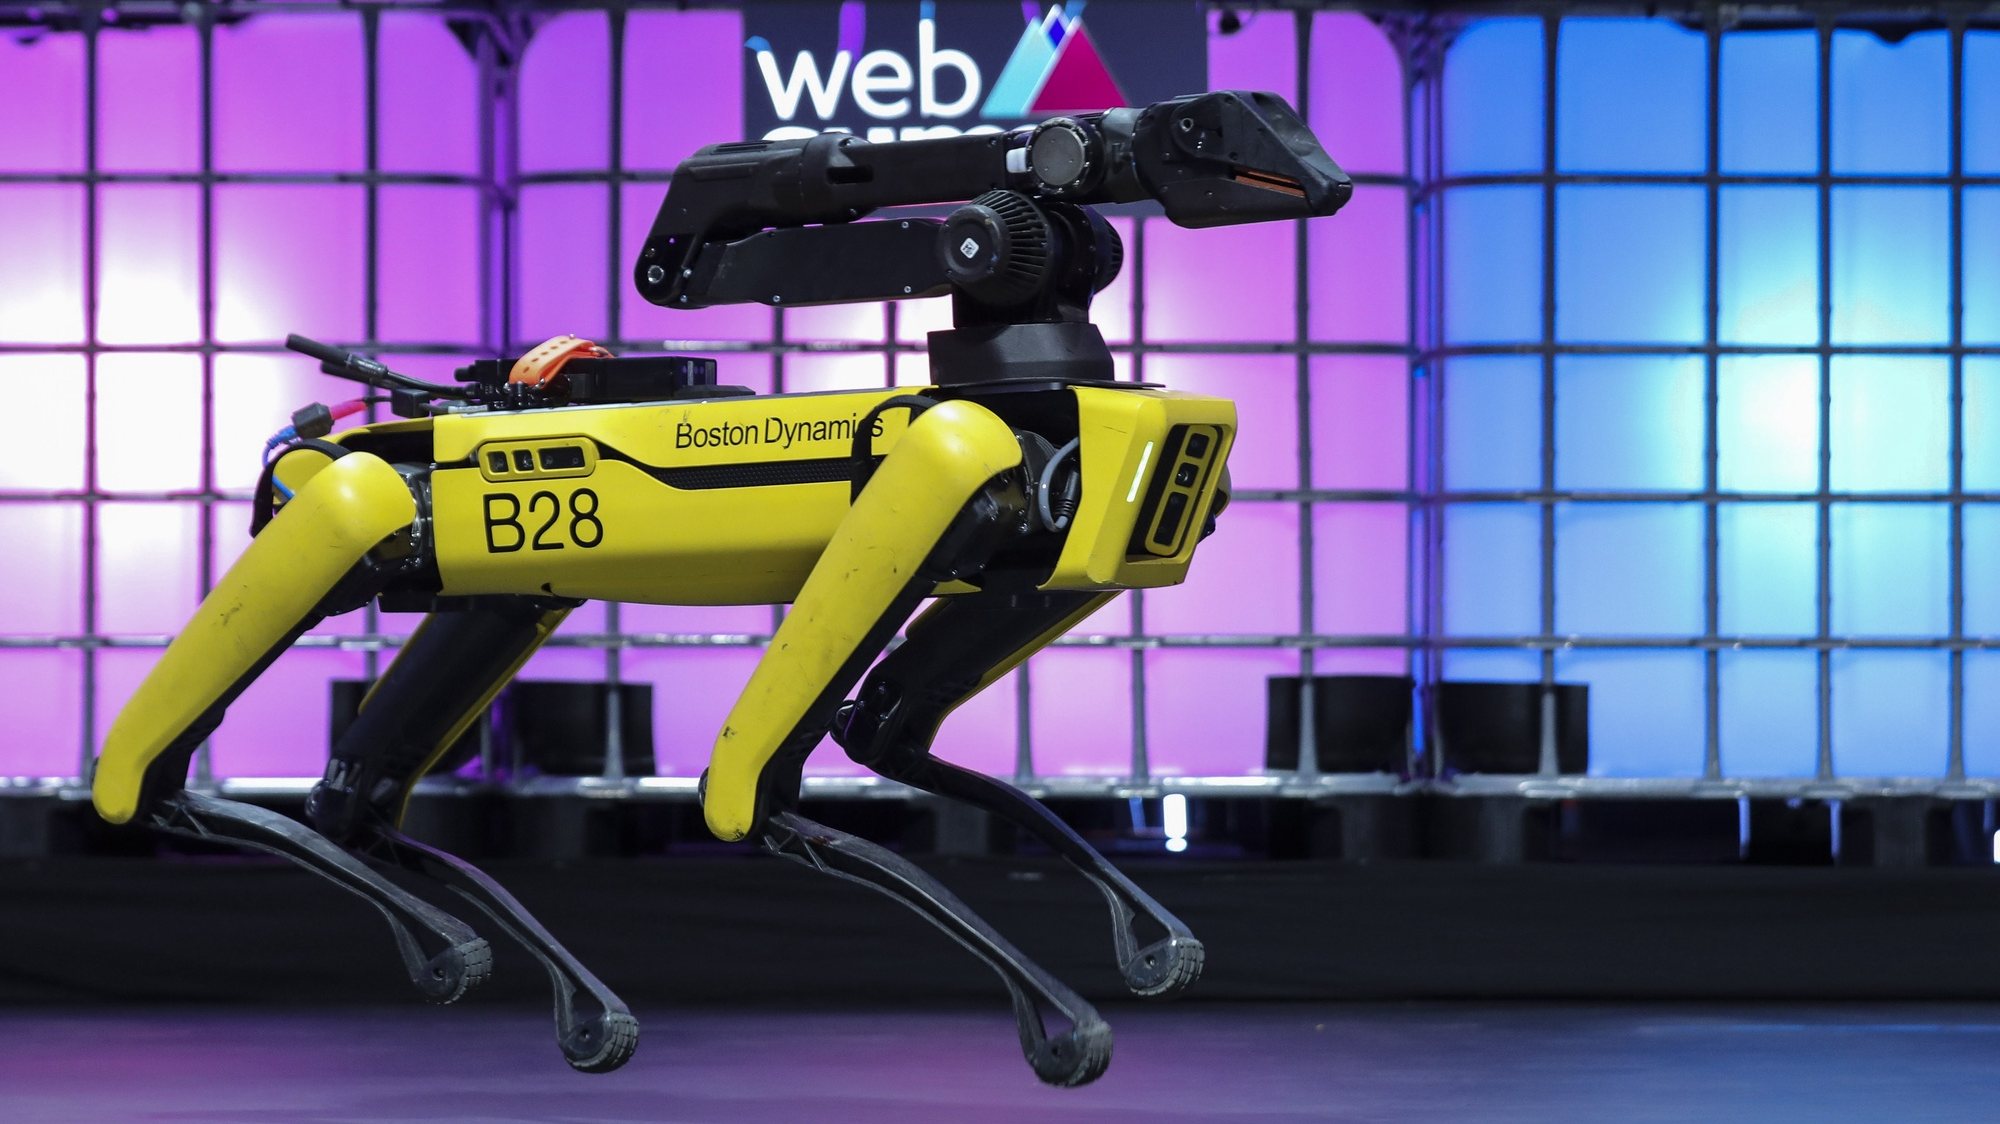 epa07978866 Spot, a quadruped robot by Boston Dynamics, is presented during the 2019 Web Summit at Atlantic Pavilion in Lisbon, Portugal, 07 November 2019. The 2019 Web Summit, considered the largest event of startups and technological entrepreneur ship in the world takes place from 04 to 07 November.  EPA/MIGUEL A. LOPES